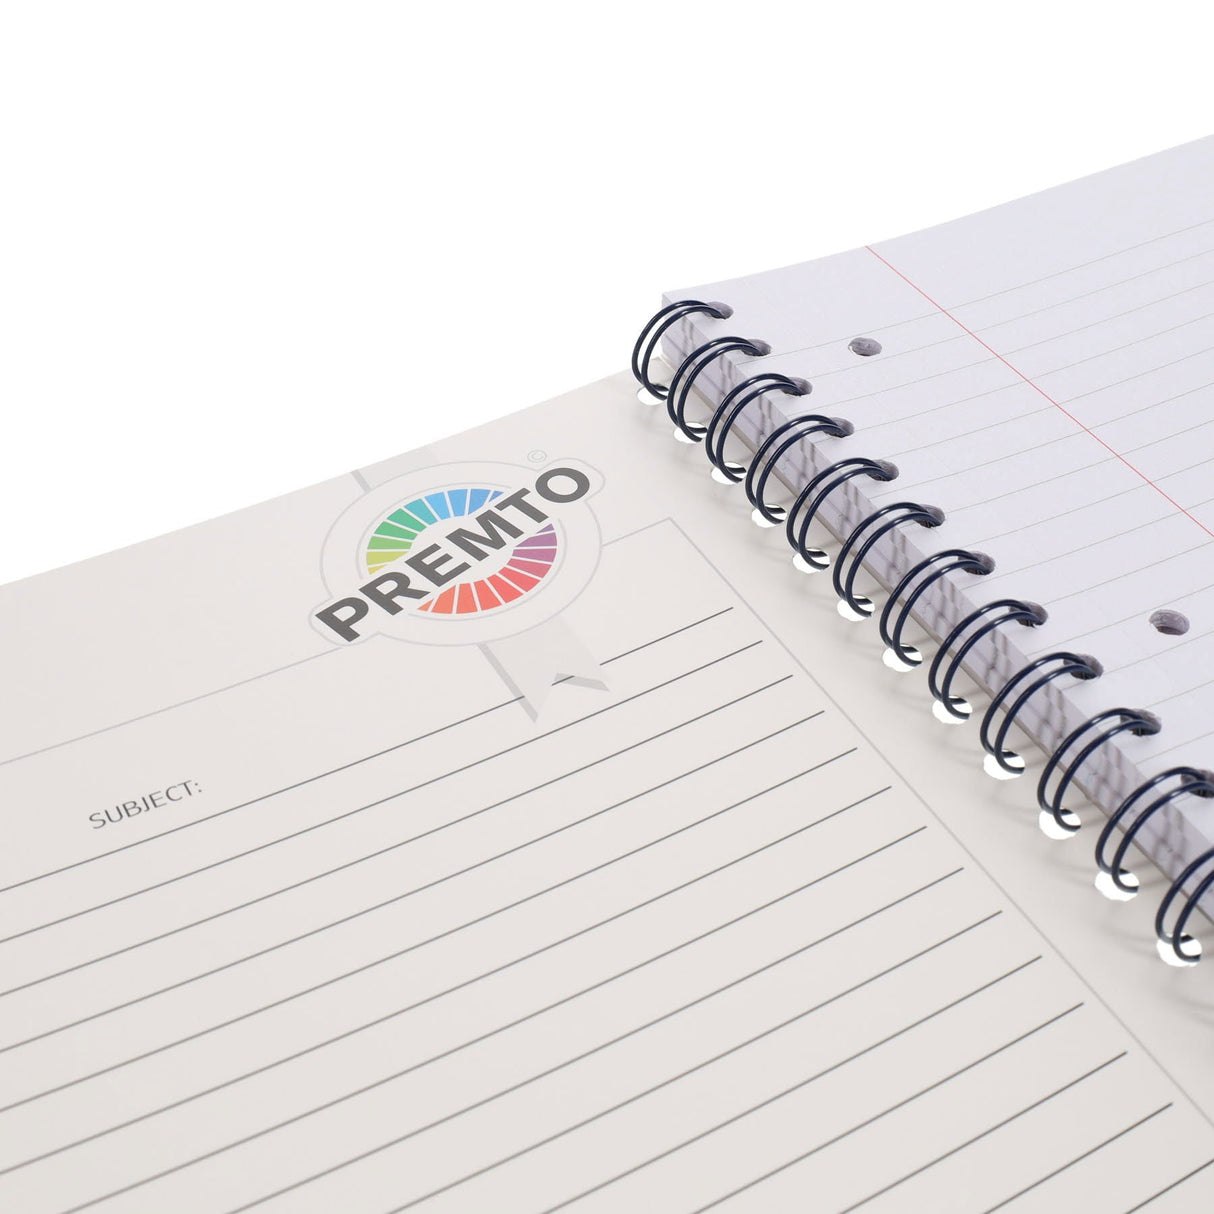 Premto A4 Wiro Notebook - 200 Pages - Caterpillar Green-A4 Notebooks-Premto|StationeryShop.co.uk